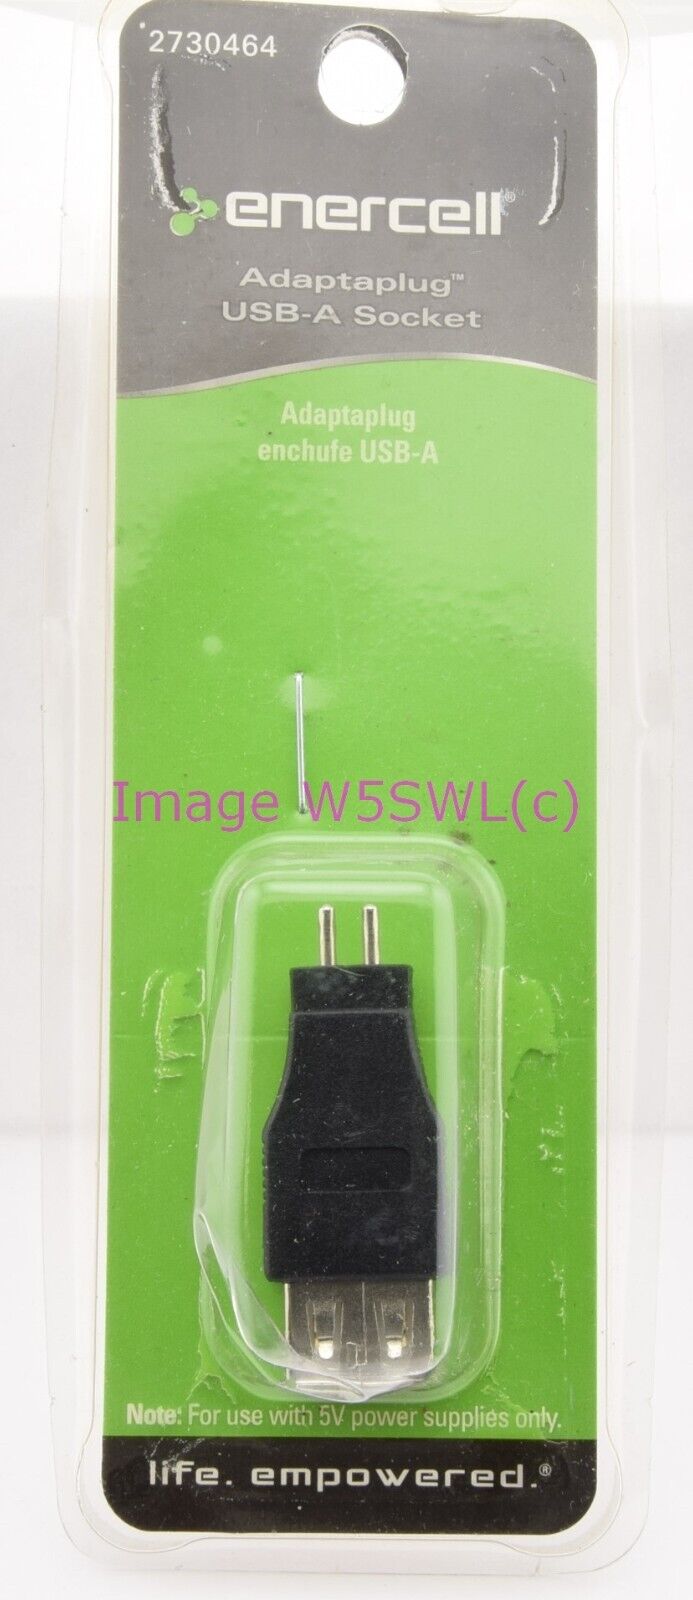 Enercell Adaptaplug USB-A 2730464 - Dave's Hobby Shop by W5SWL